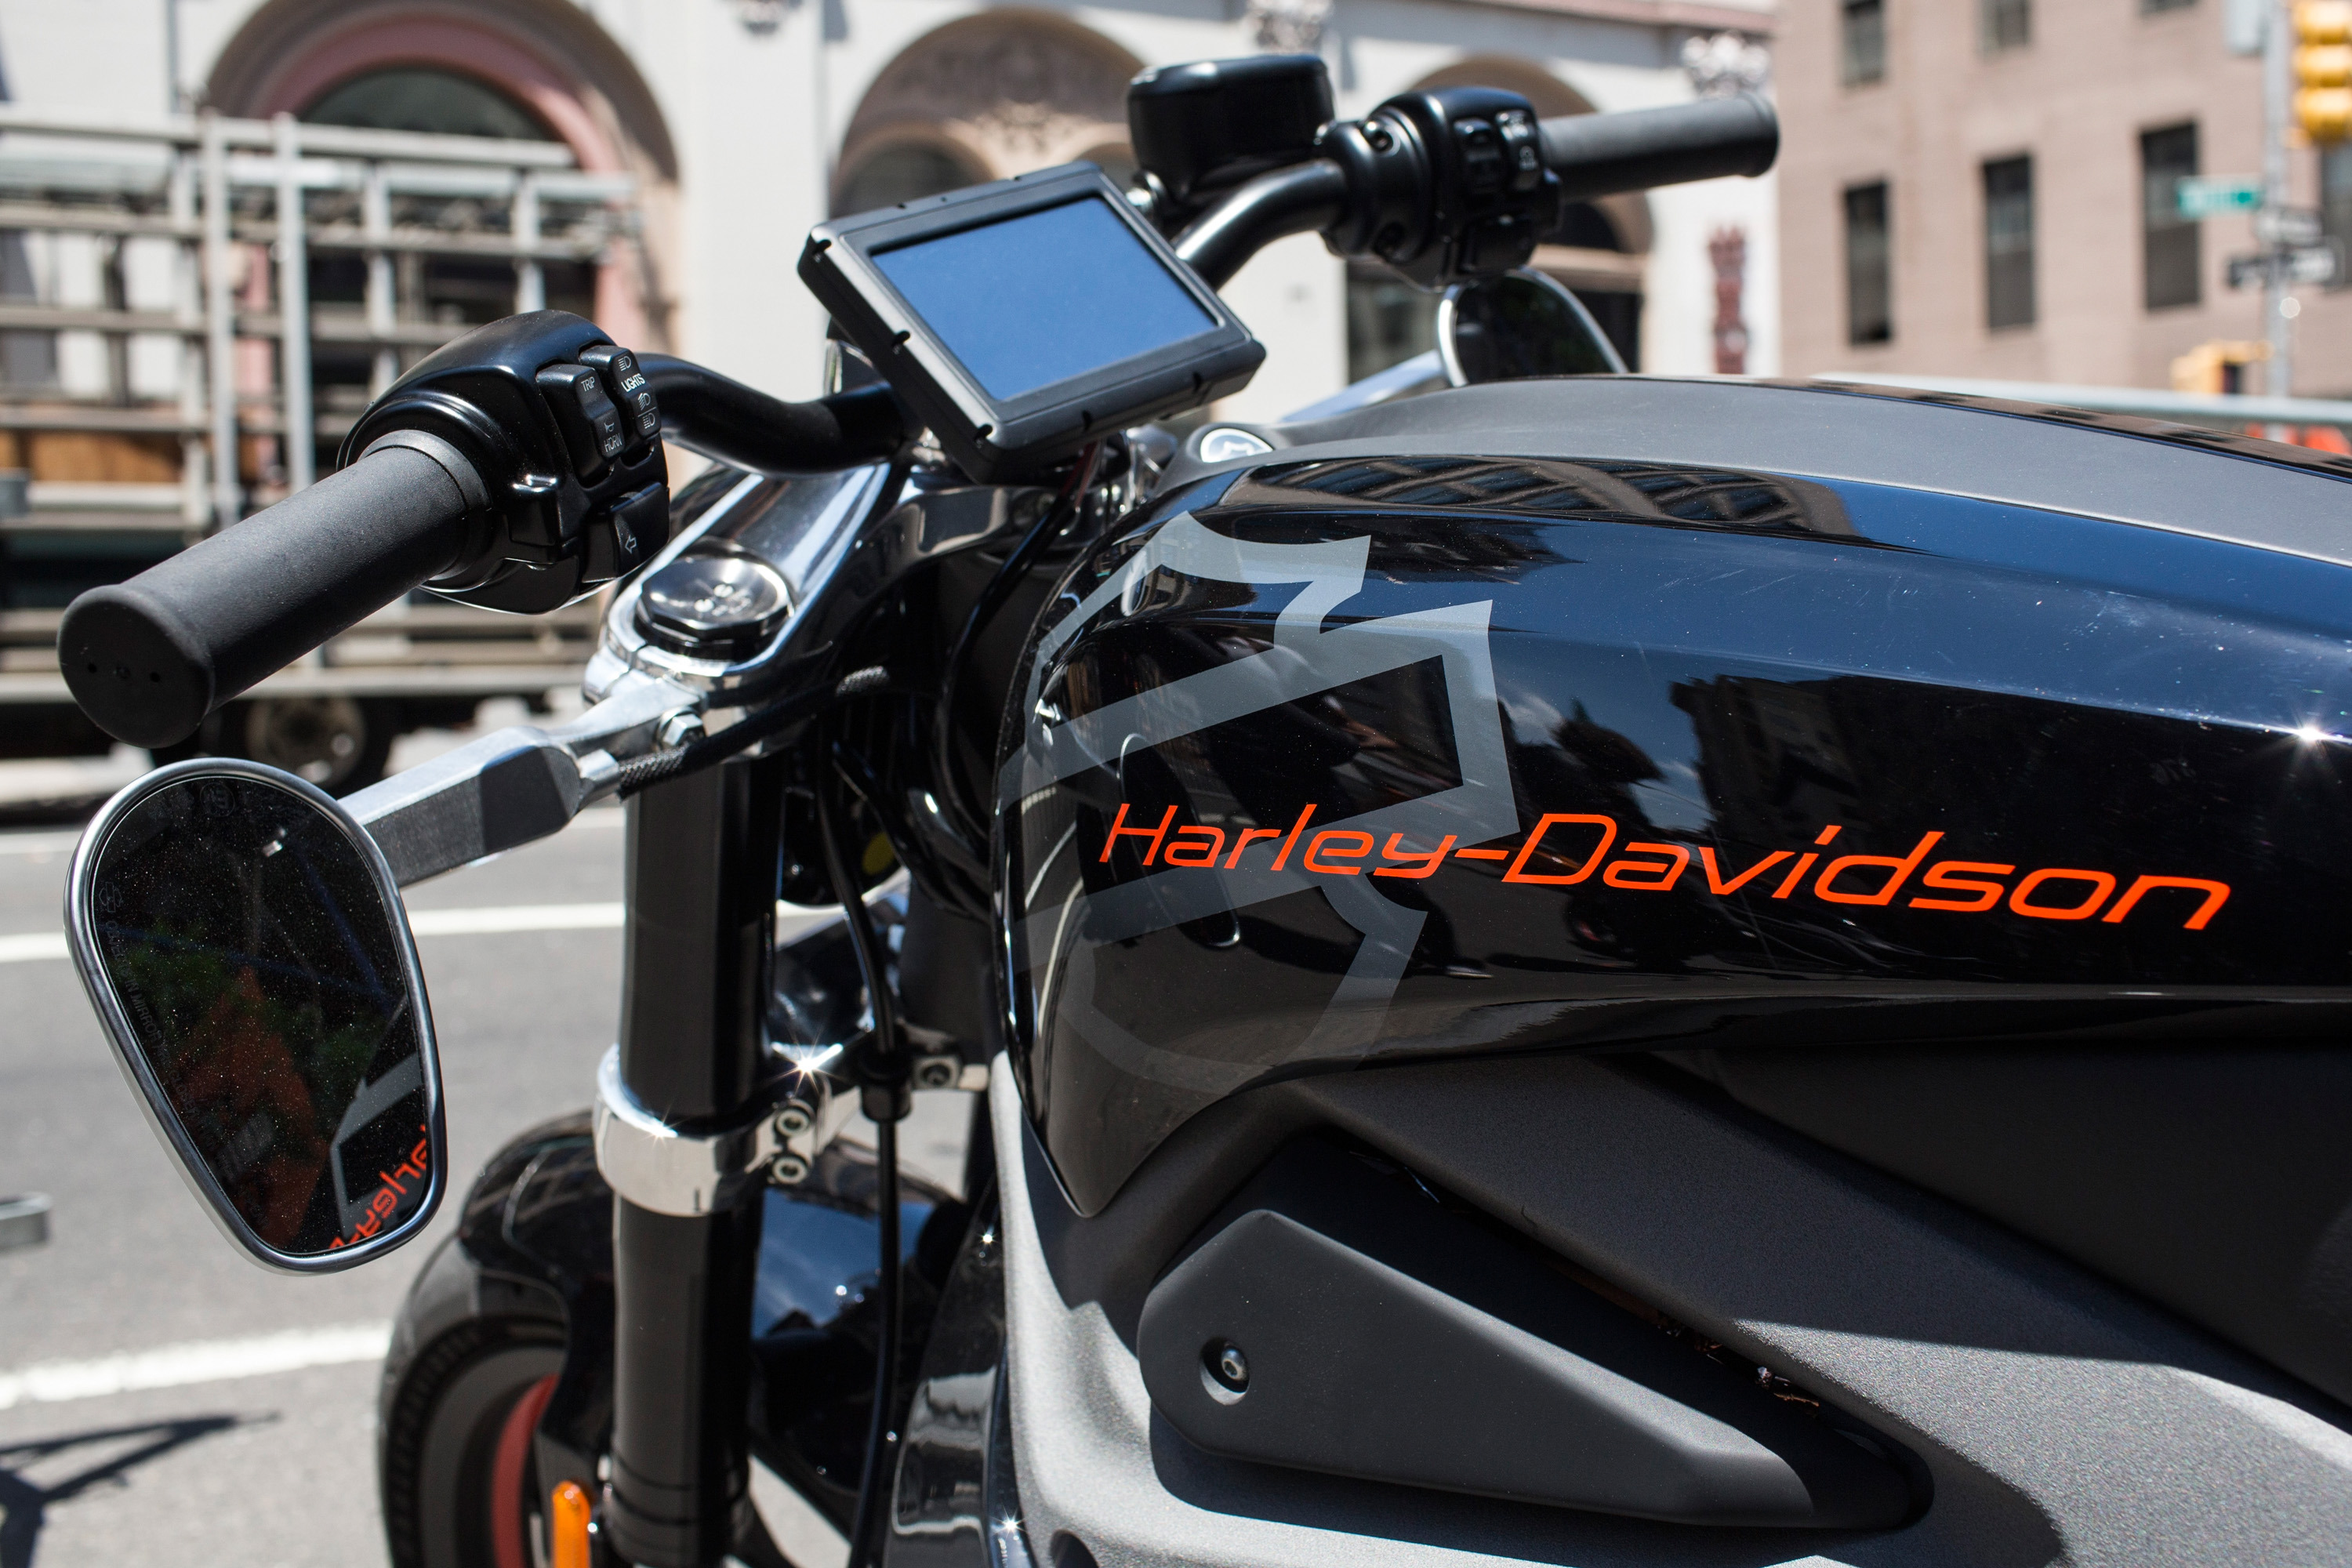 A Harley Davidson Livewire motorcycle, Harley Davidson's first electric bike, sits on display outside the Harley Davidson Store on June 23, 2014 in New York City.